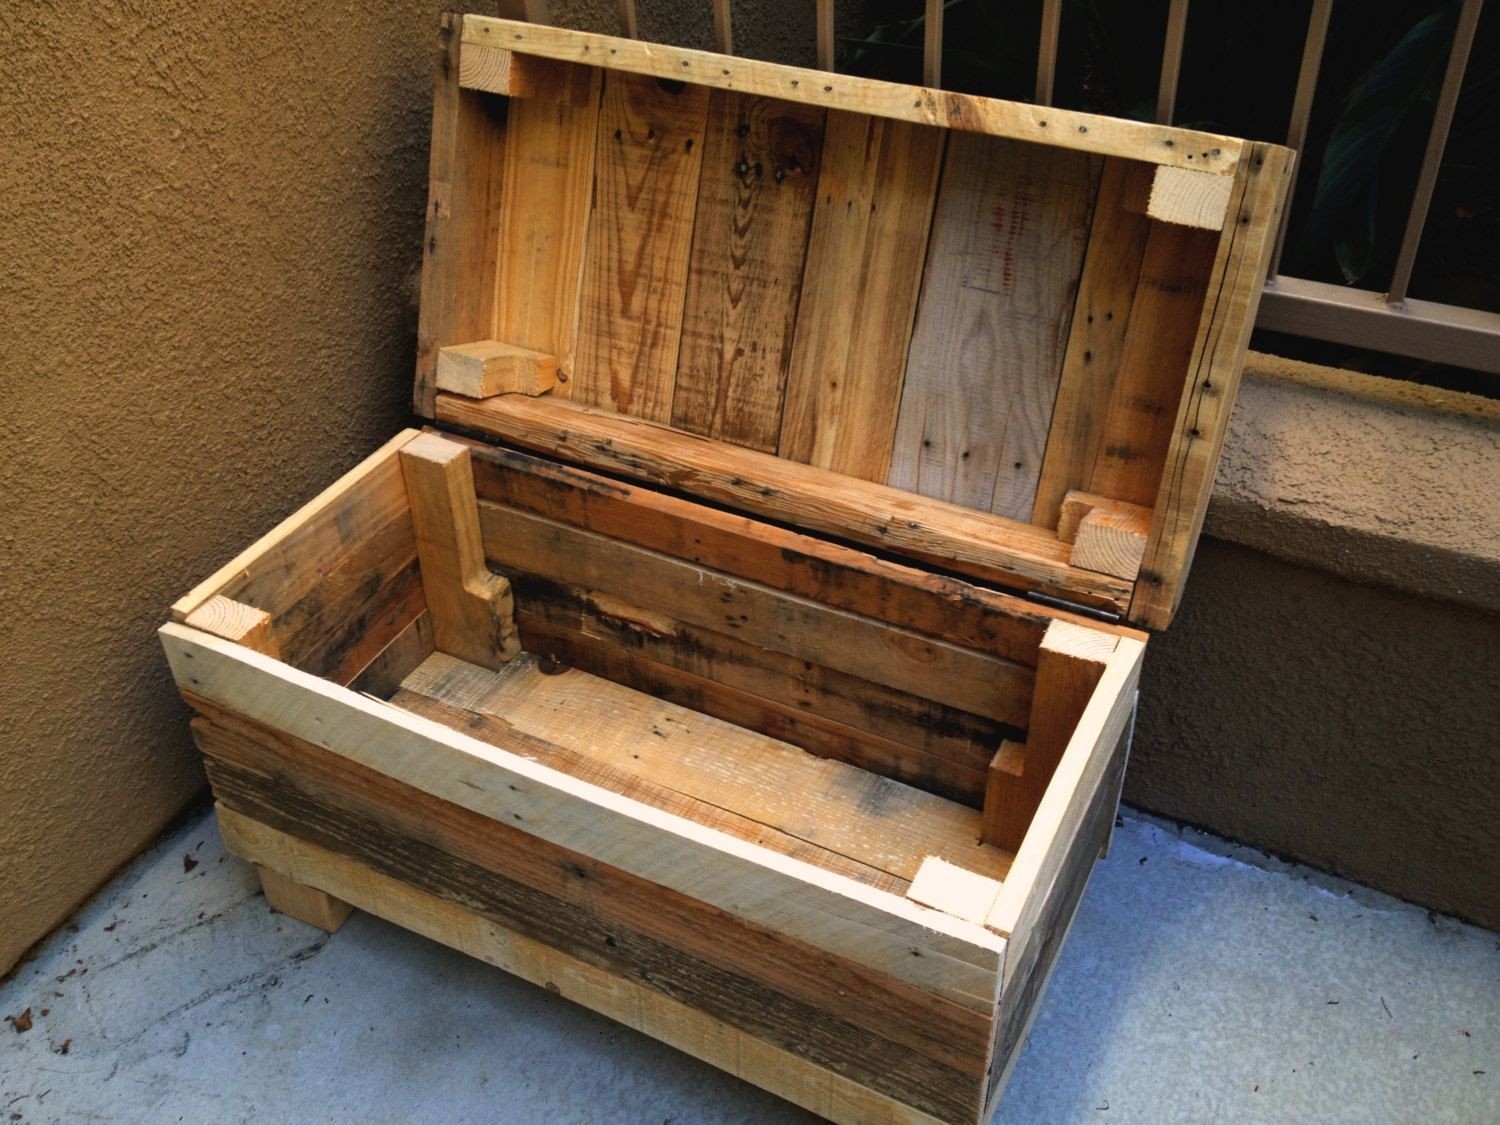 toy chest with compartments